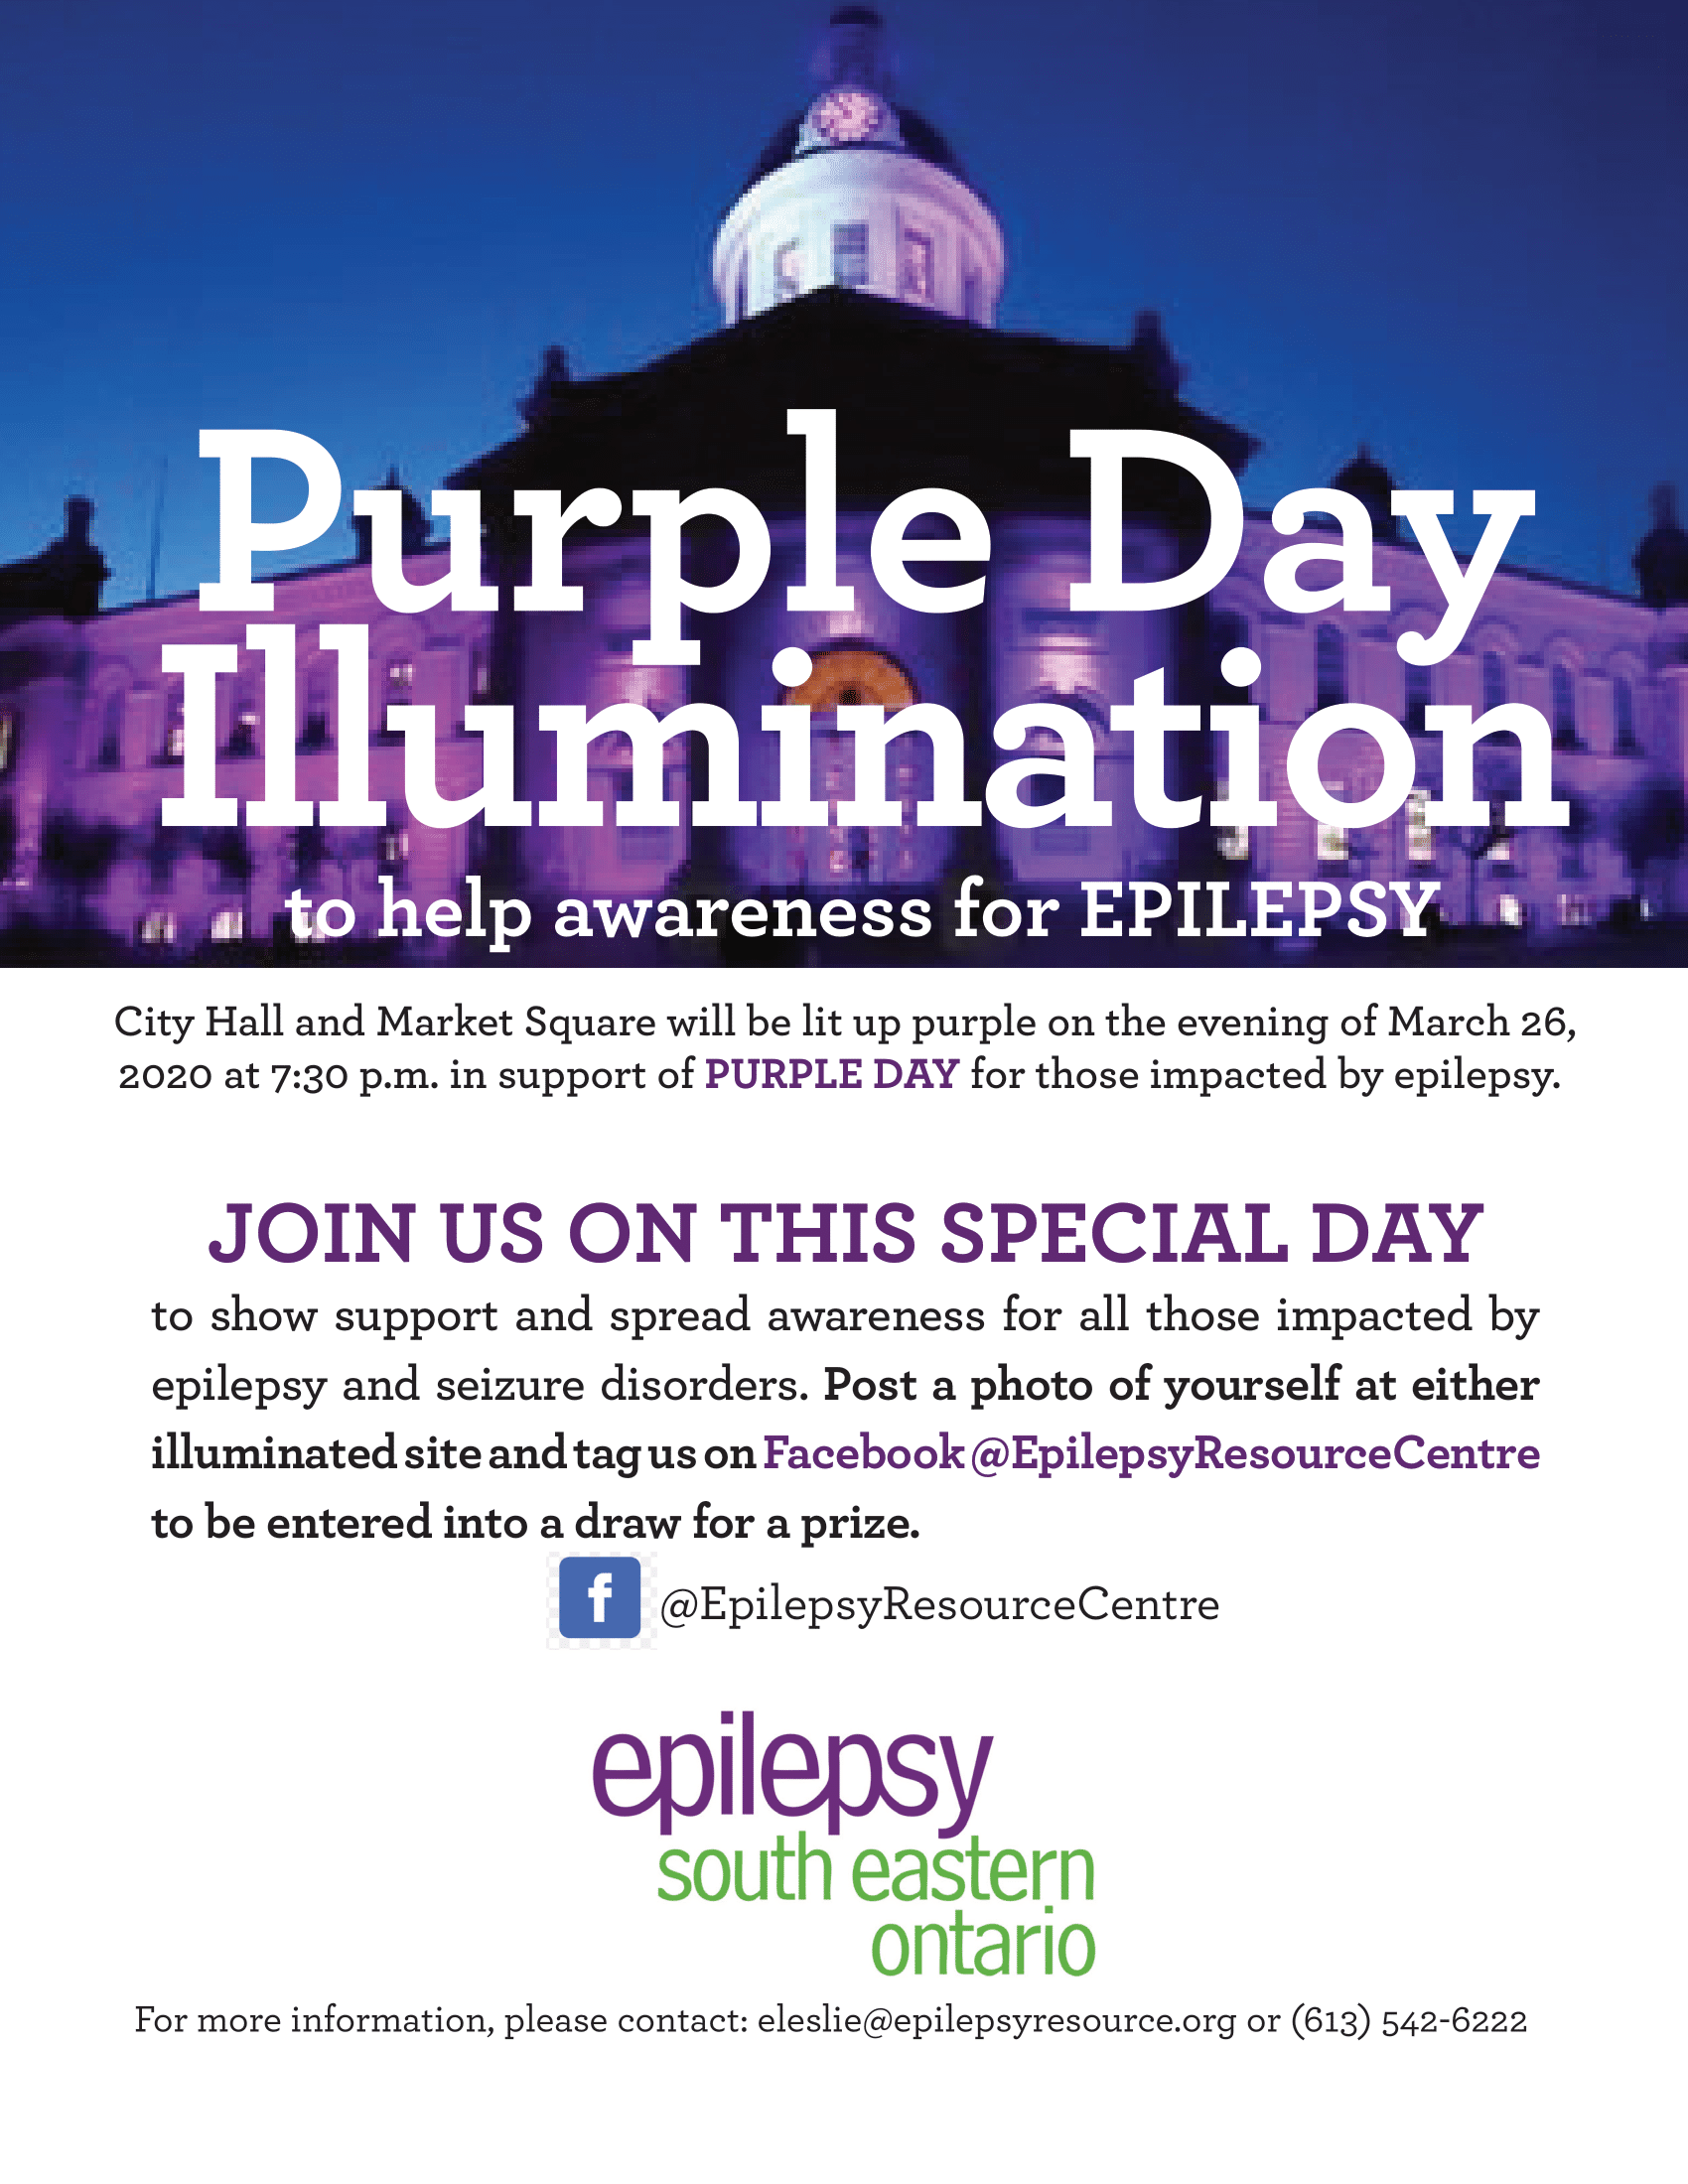 Join us in watching City Hall and Marketplace light up purple for Purple Day.